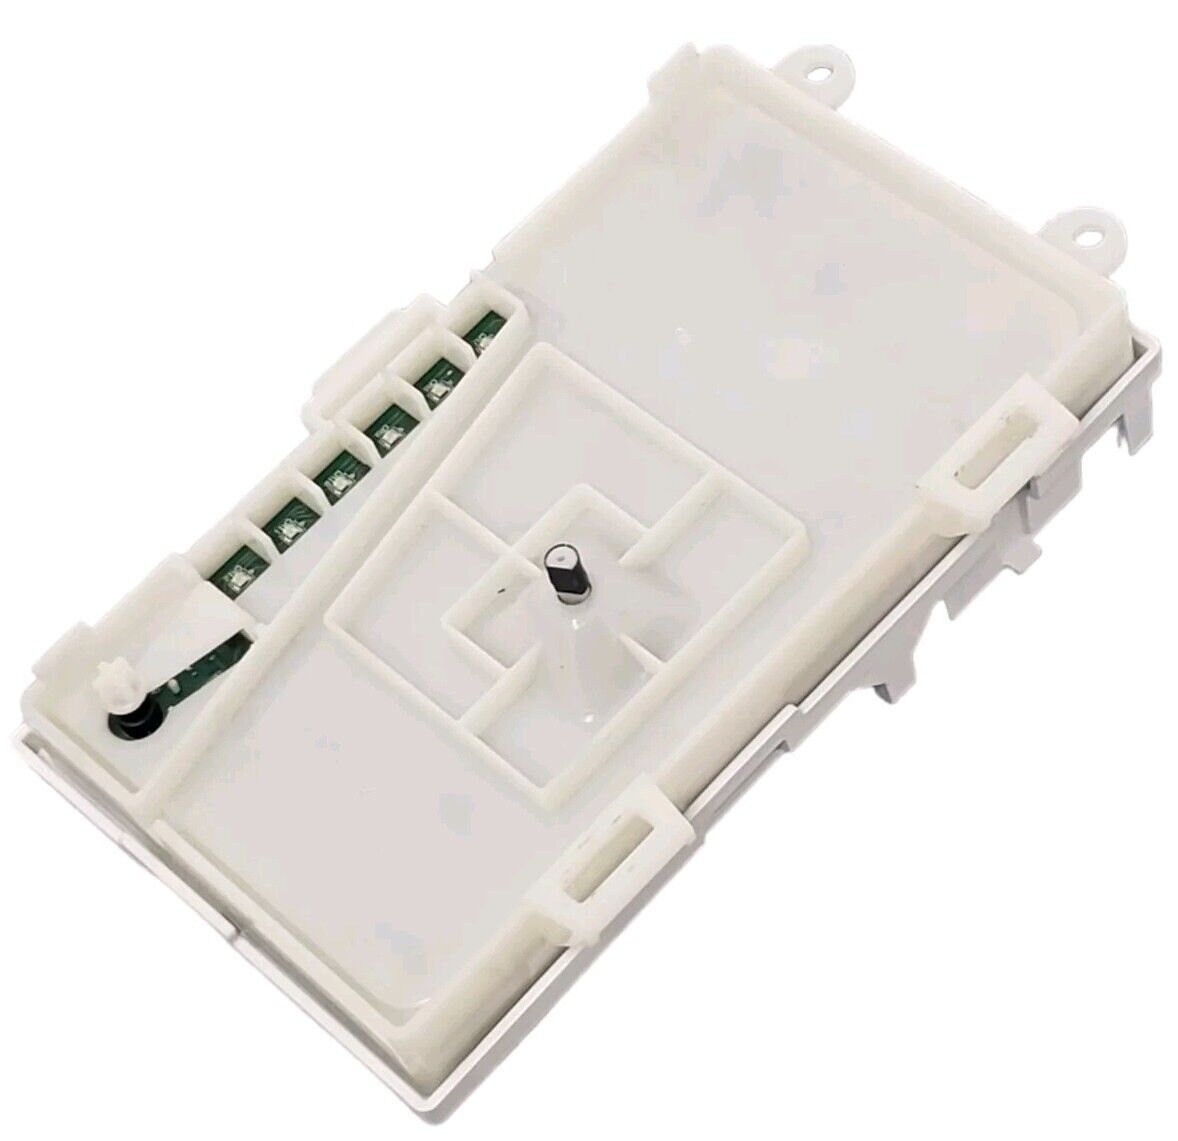 OEM Replacement for Whirlpool Washer Control W10671335